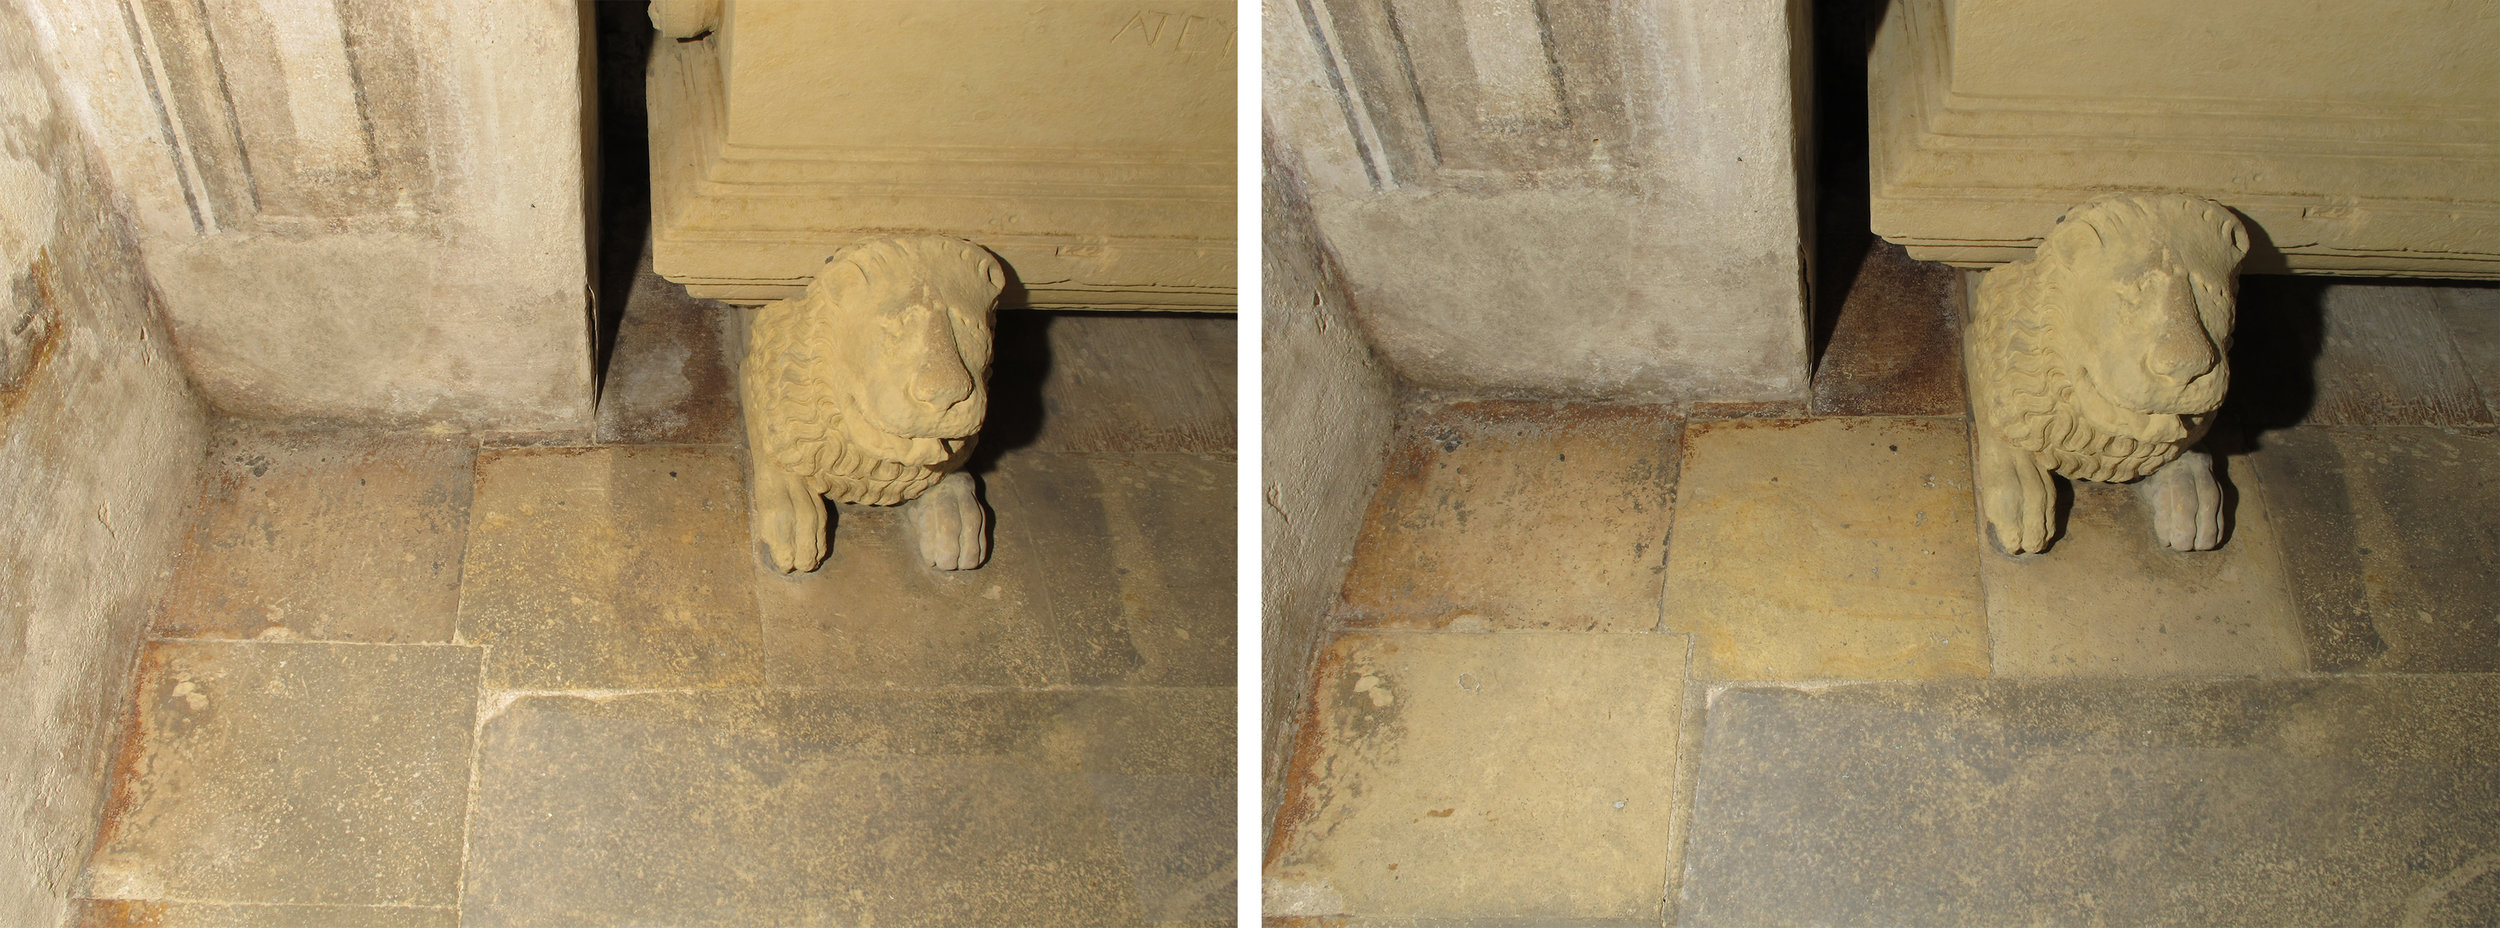  Detail of the Crypt stone floor before (left) and during (right) removal of a thick layer of dirt and microbiological growth.  Image © Courtauld CWPD 